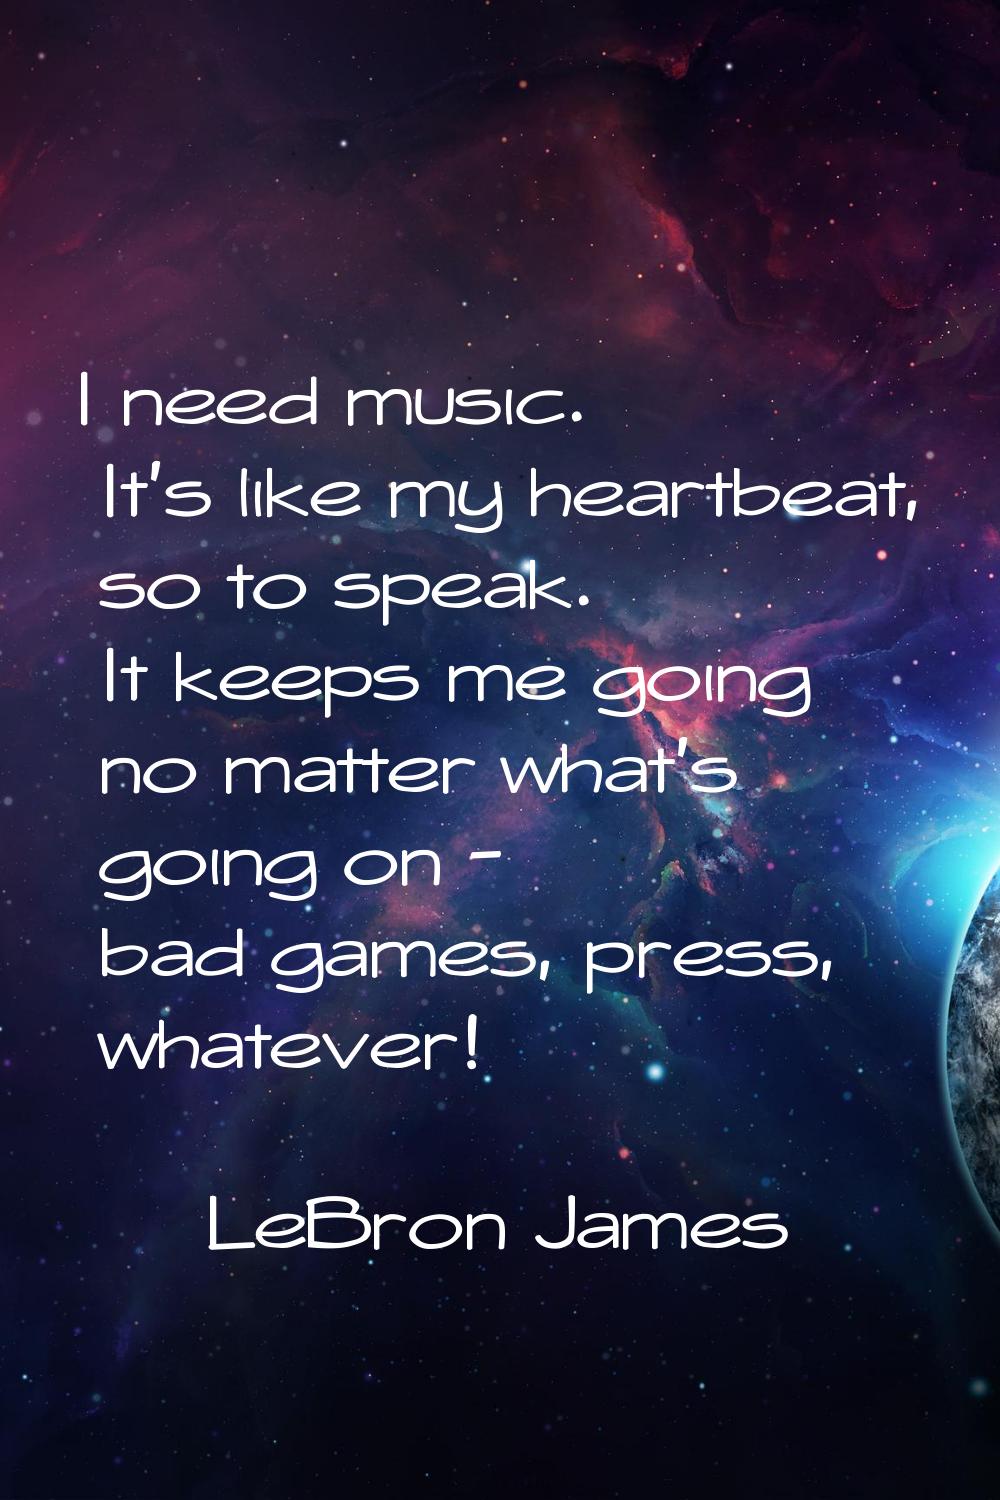 I need music. It's like my heartbeat, so to speak. It keeps me going no matter what's going on - ba